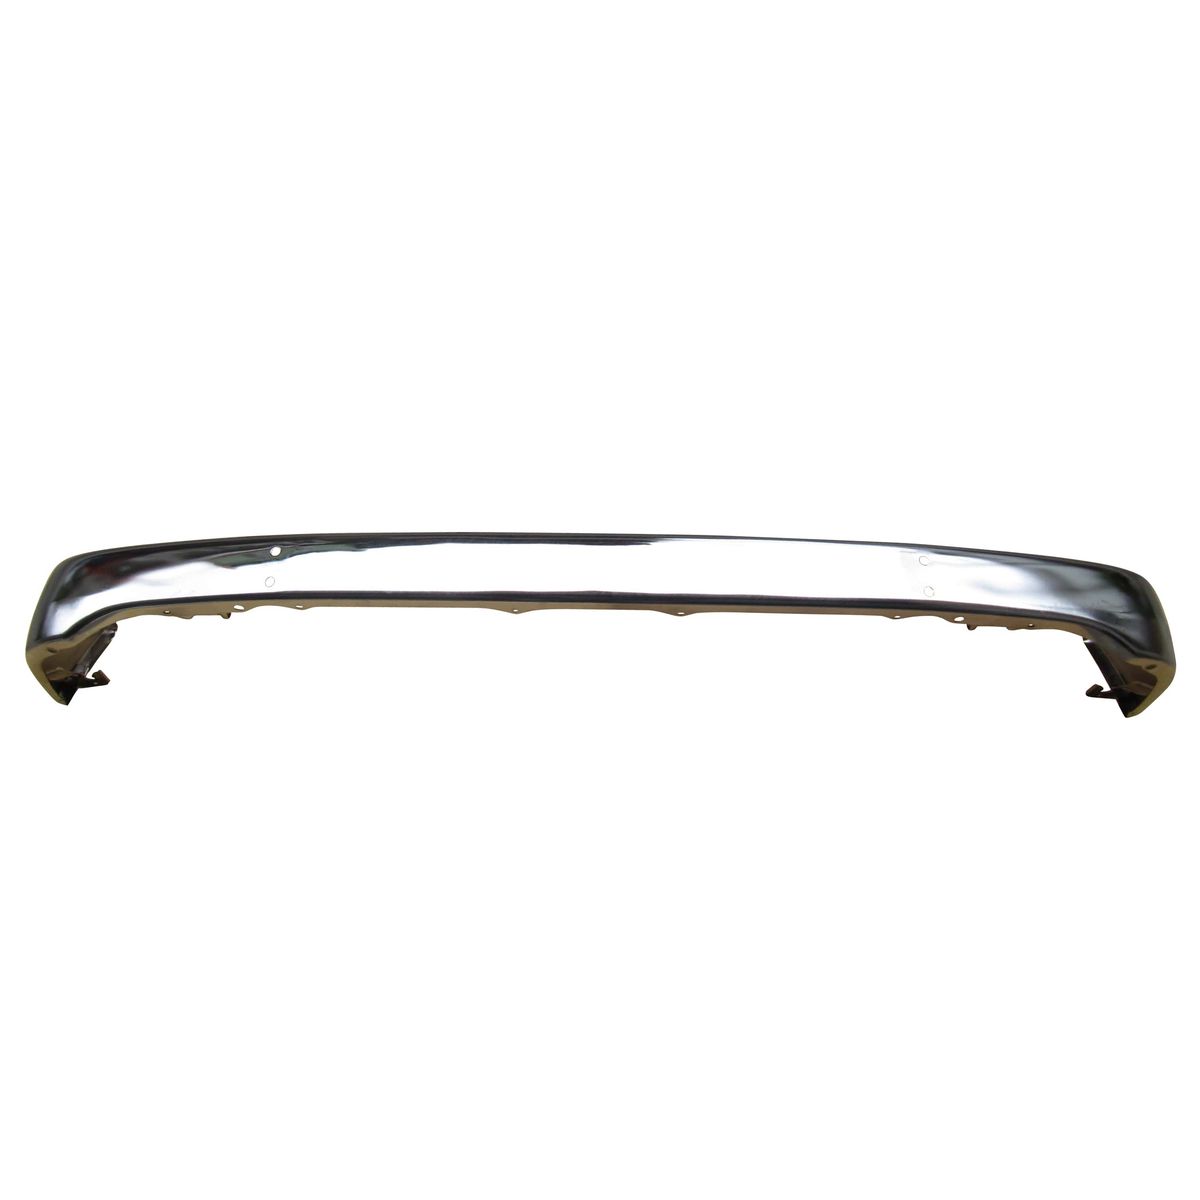 FRON BUMPER FOR TOYOTA-OE:52101-35640-52101-35640